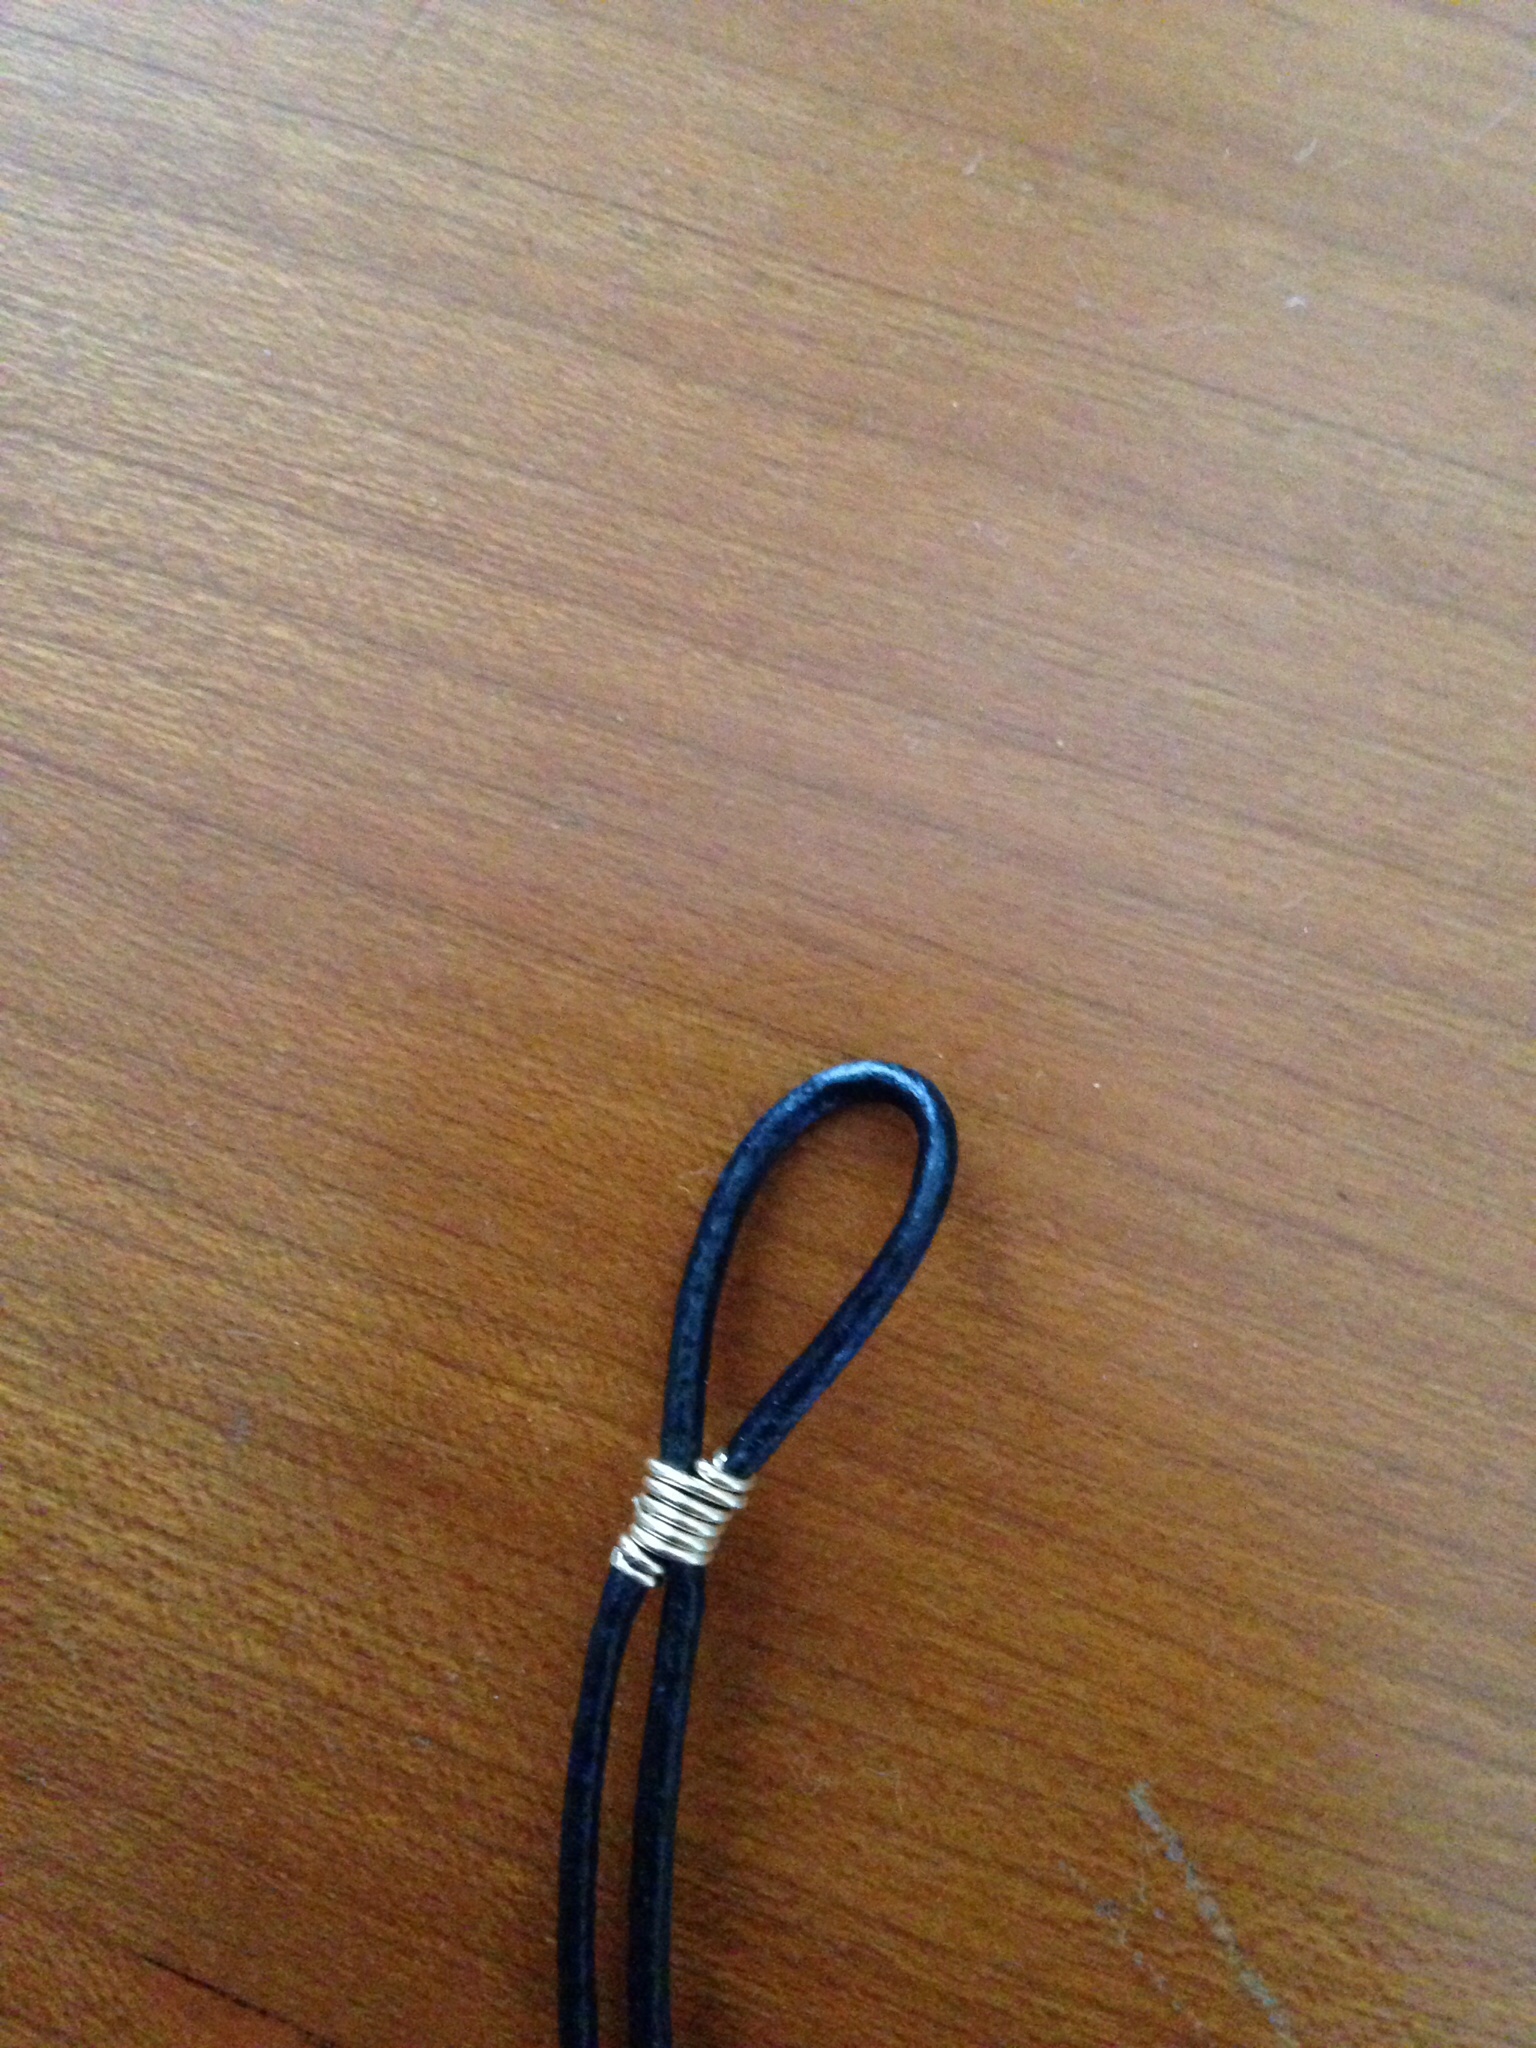 Finsihed leather and wire piece